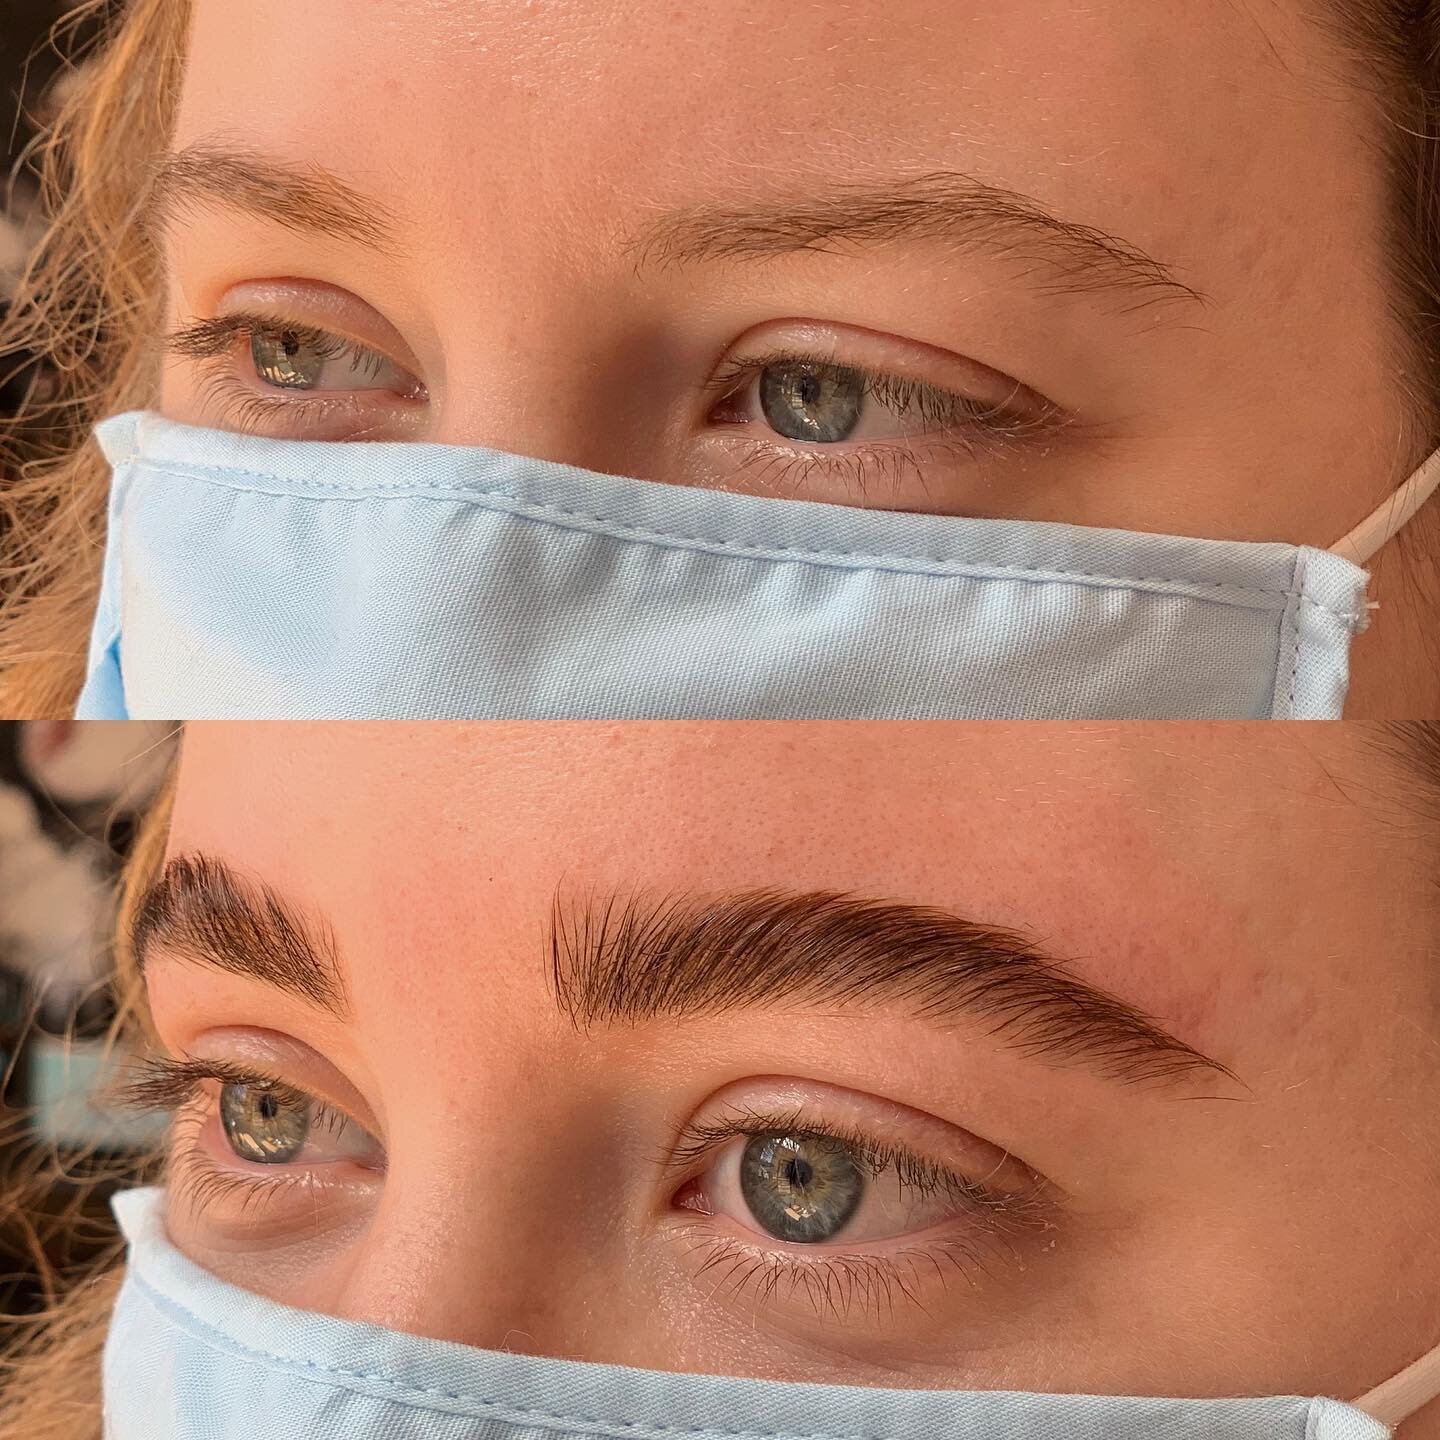 Yes, THESE ARE THE SAME BROWS!!😍 thanks for coming in Simone!! ❤️ 
.
.
.
#brows #browlamination #chicagobrows #browartist #browlift #fluffybrows #boybrow #nowopen #fixhairstudio #nowtrending #newbrows #newbrowswhodis #glowupseason #beautytips #chica